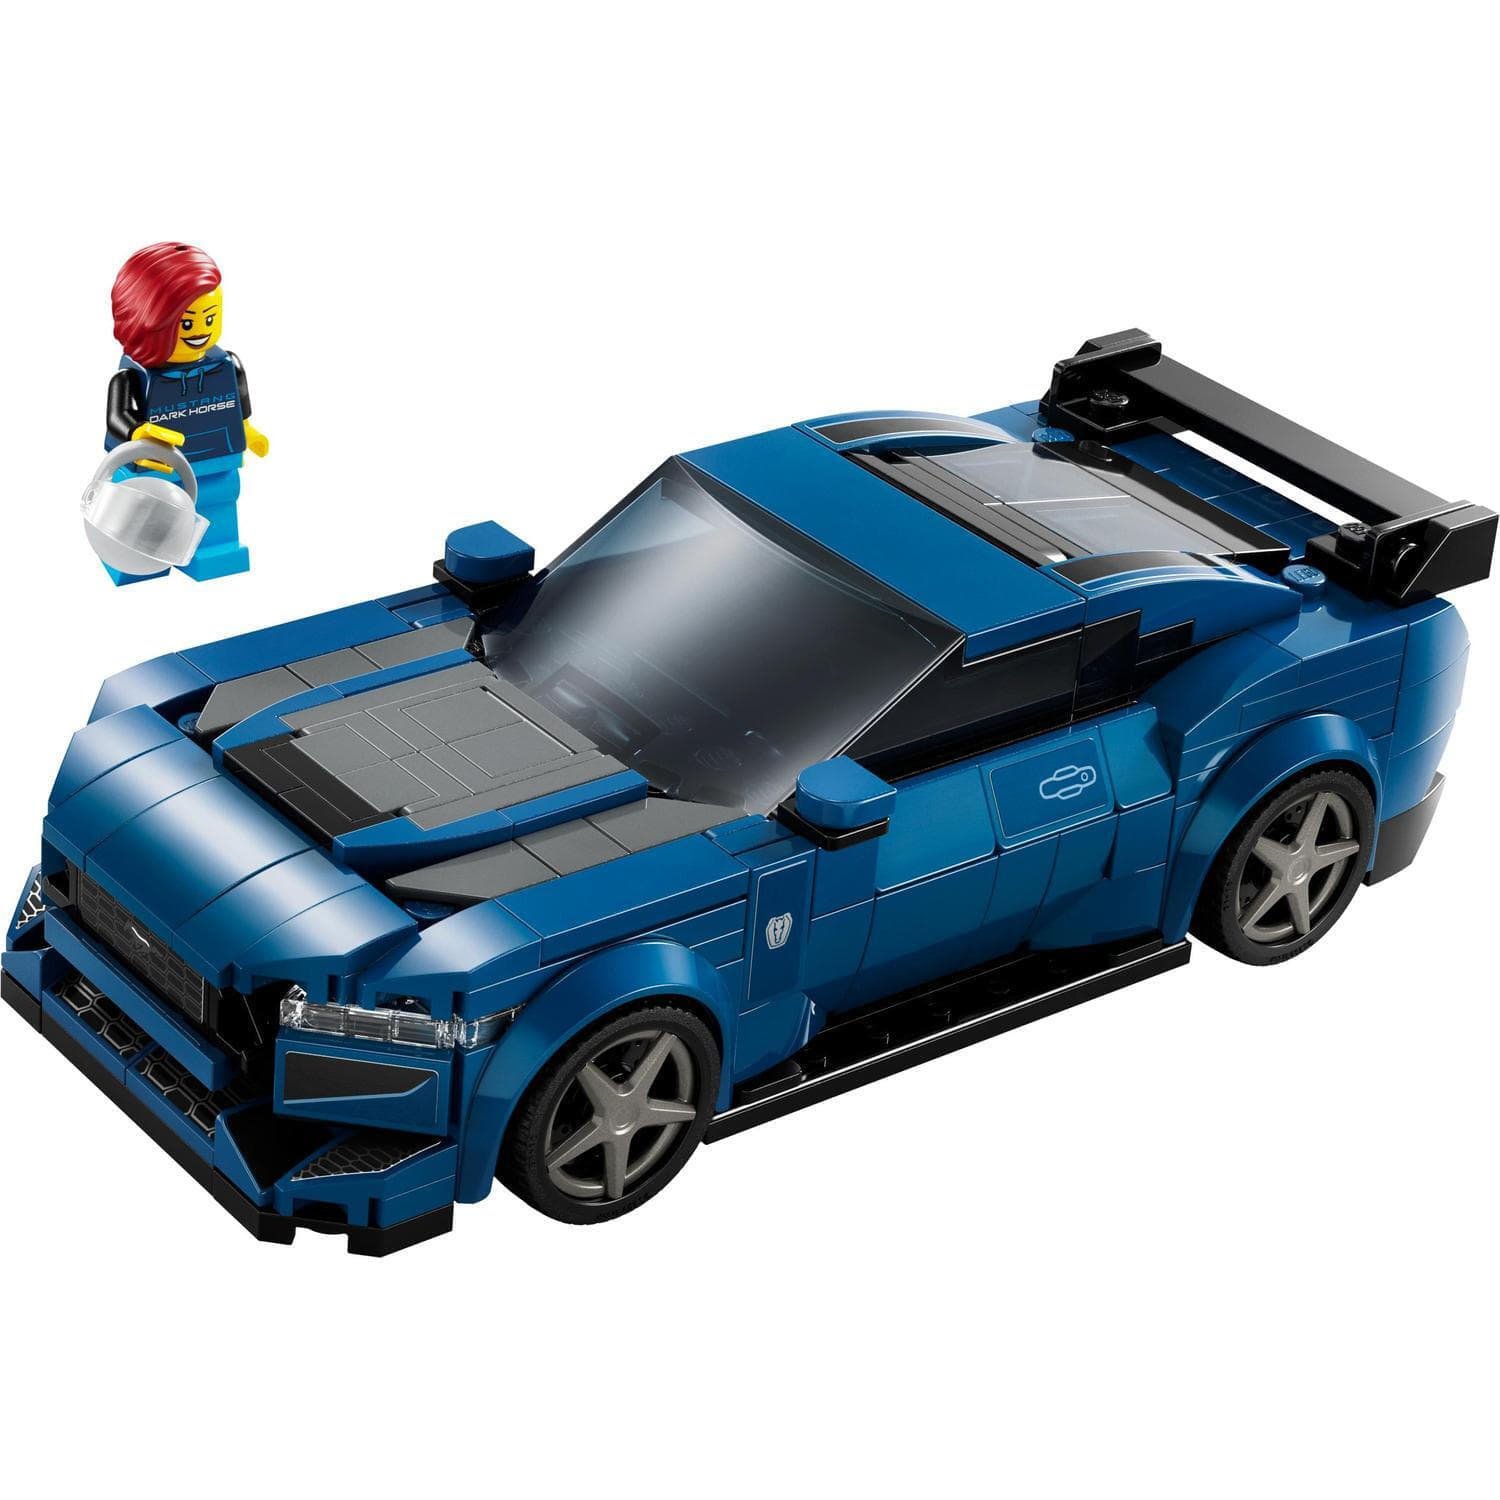 Speed Champions 76920 Ford Mustang Dark Horse Sports Car